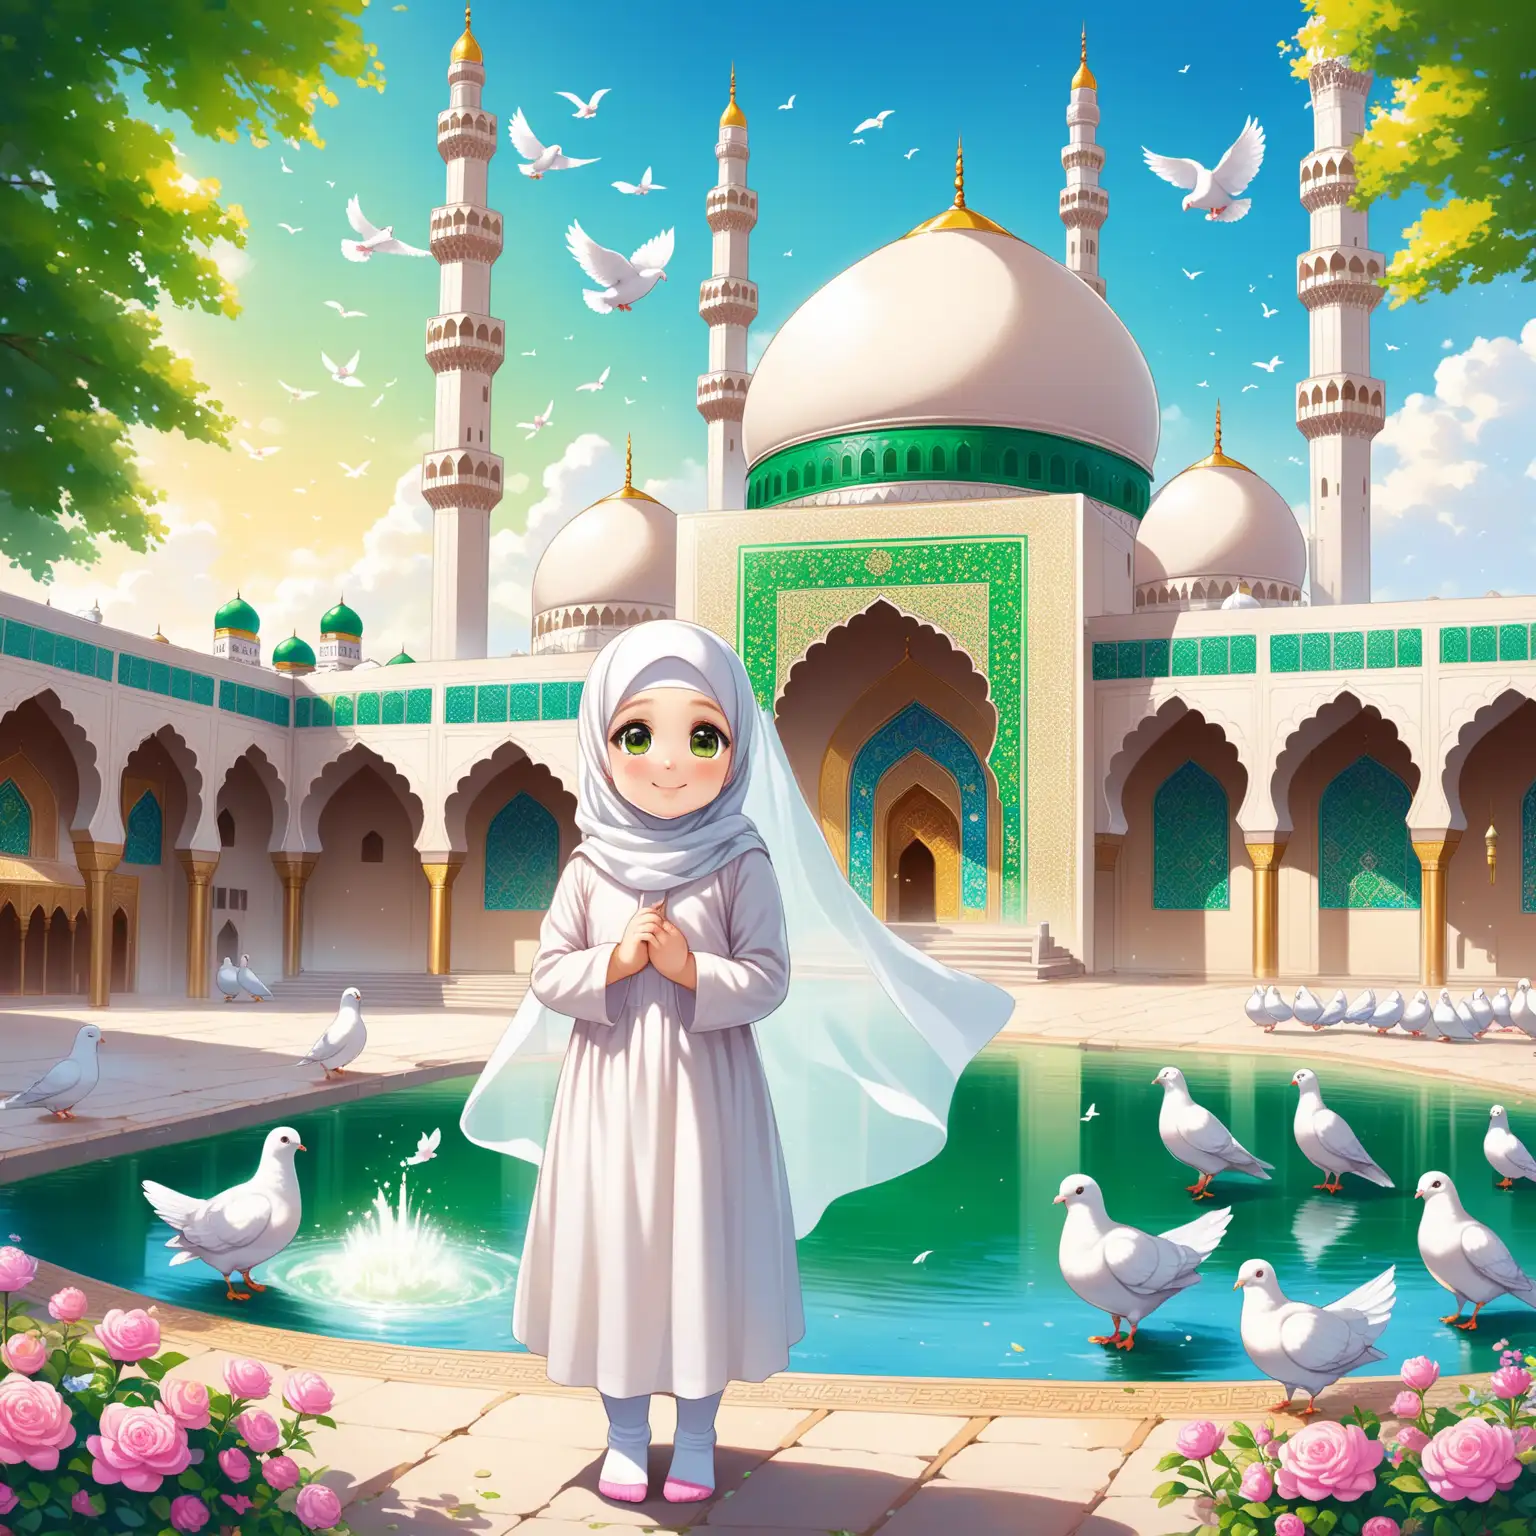 Character Persian little girl(full height, Big white flag in one hand proudly, Muslim, baby face, with emphasis no hair out of veil(Hijab), smaller eyes, bigger nose, white skin, cute, smiling, wearing socks, clothes full of Persian designs).

Atmosphere beautiful Jamkaran mosque, yard, green dome, colorful flowers, pond with water fountain, many pigeons, nobody.